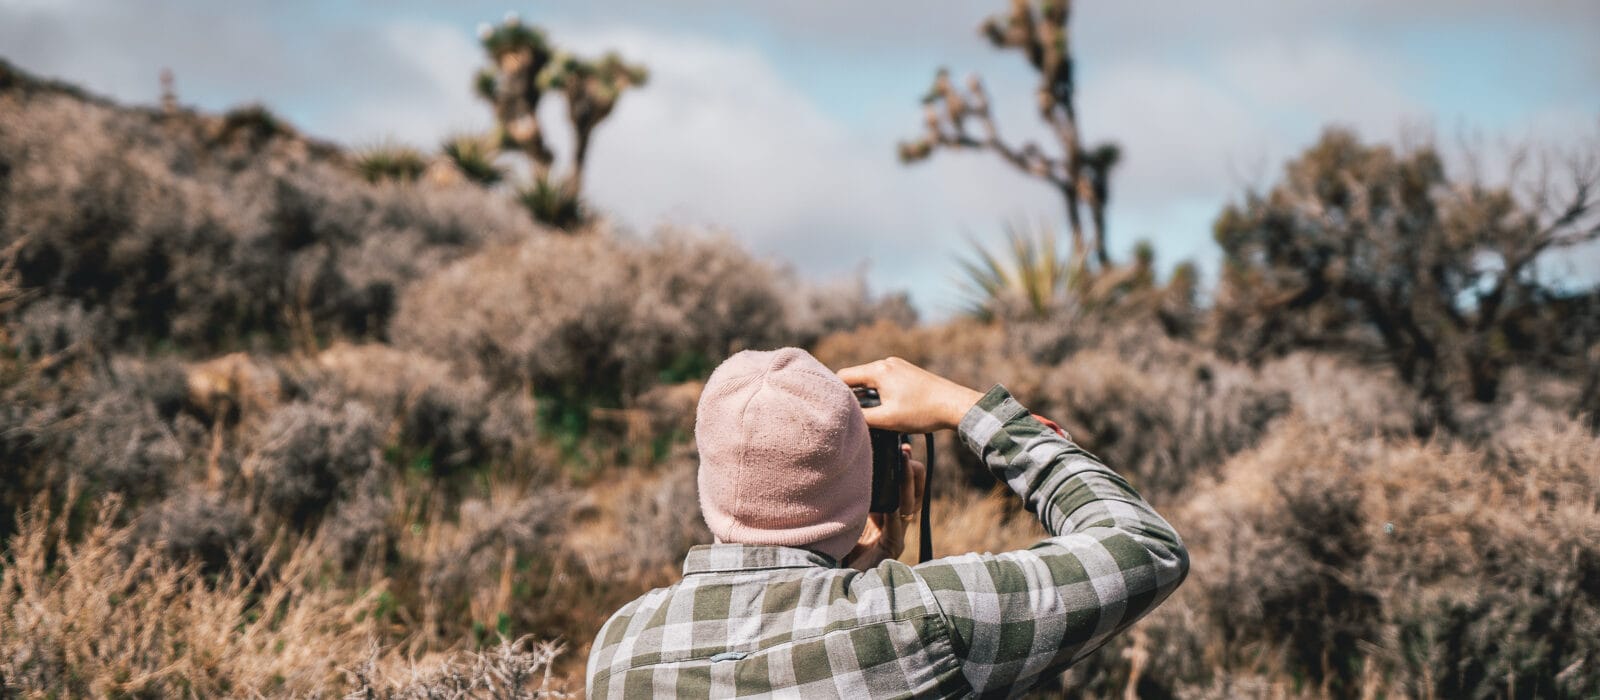 The Ultimate Guide for Your Joshua Tree Road Trip